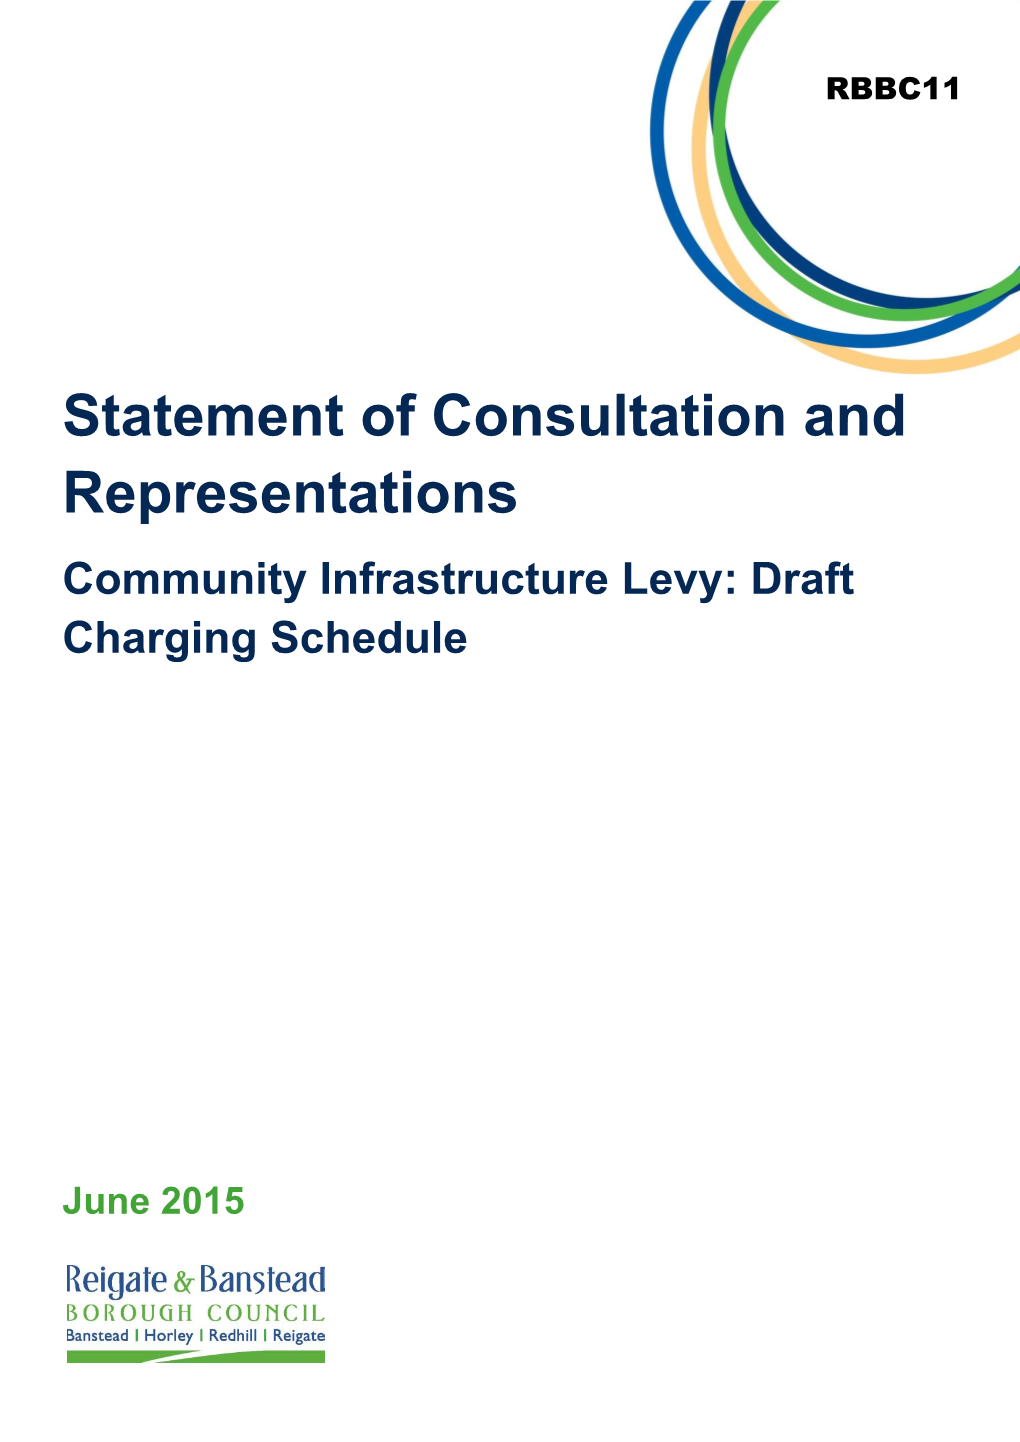 Statement of Consultation and Representations Community Infrastructure Levy: Draft Charging Schedule